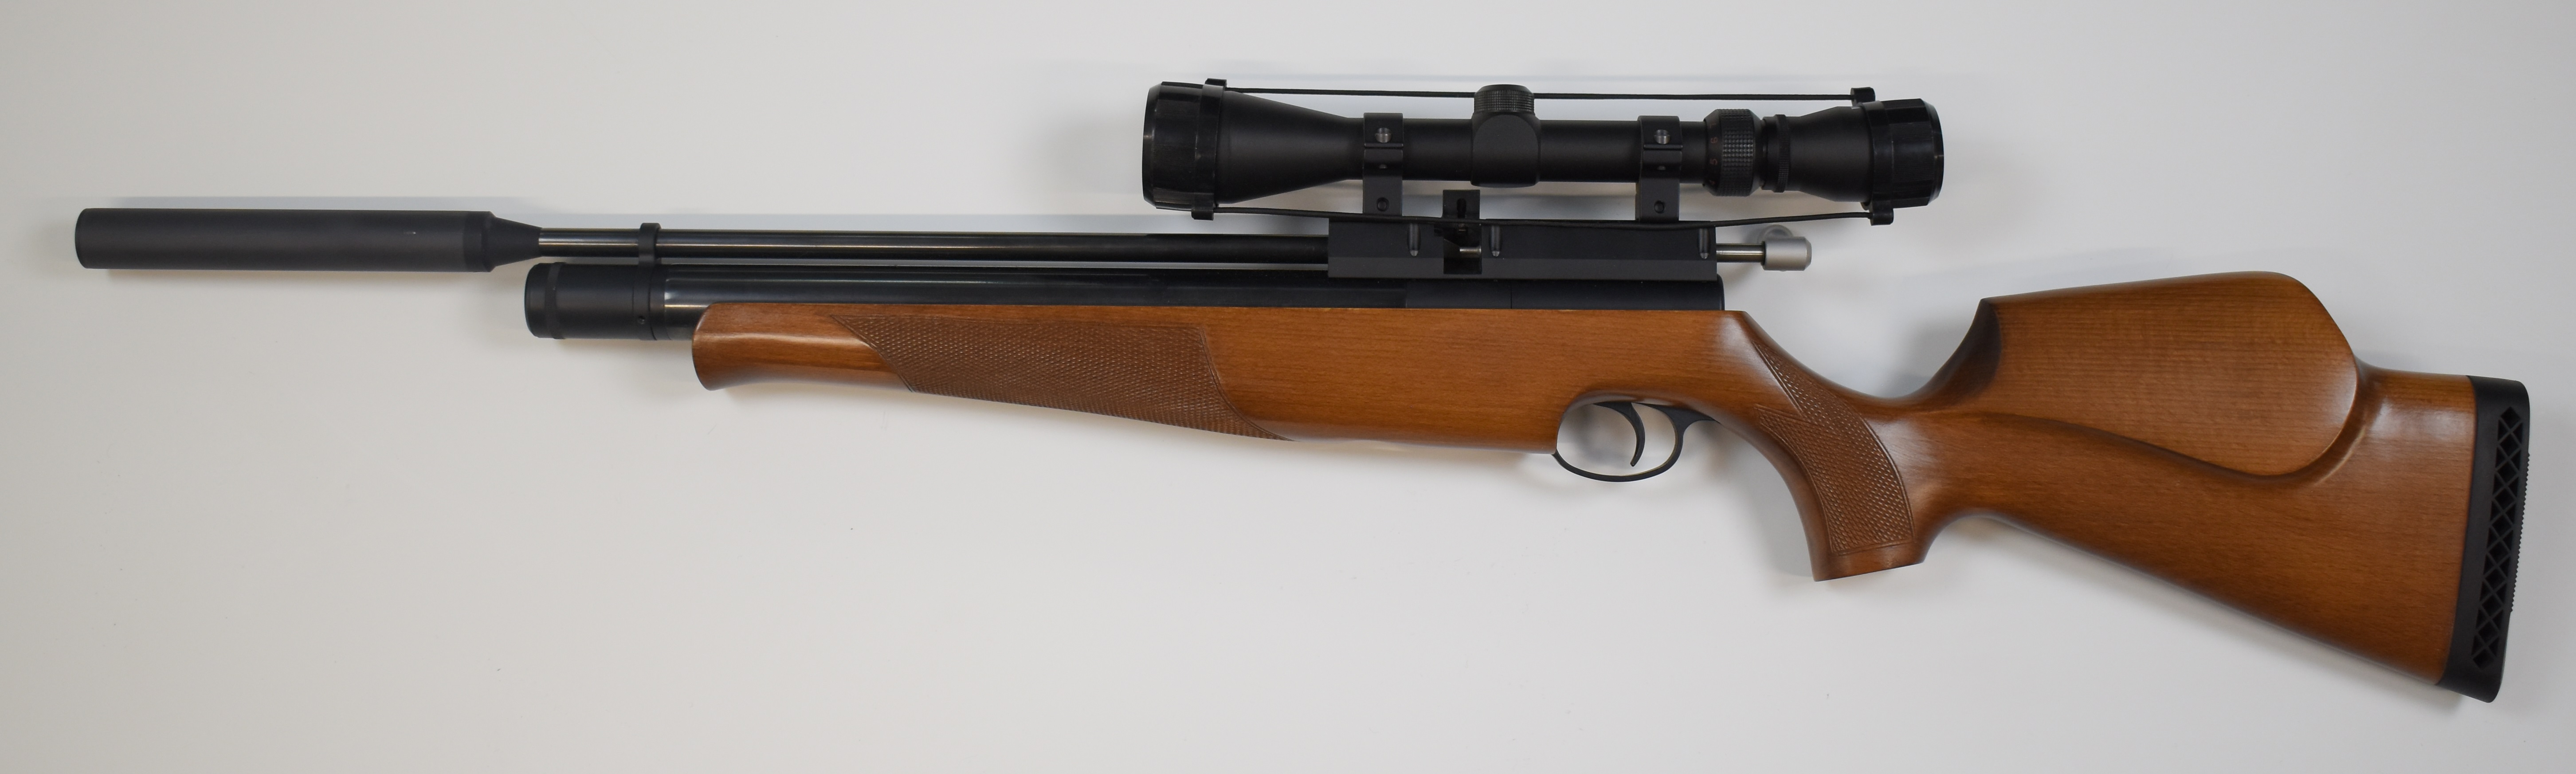 Air Arms S410 .22 PCP air rifle with chequered semi-pistol grip and forend, raised cheek piece, 10- - Image 7 of 11